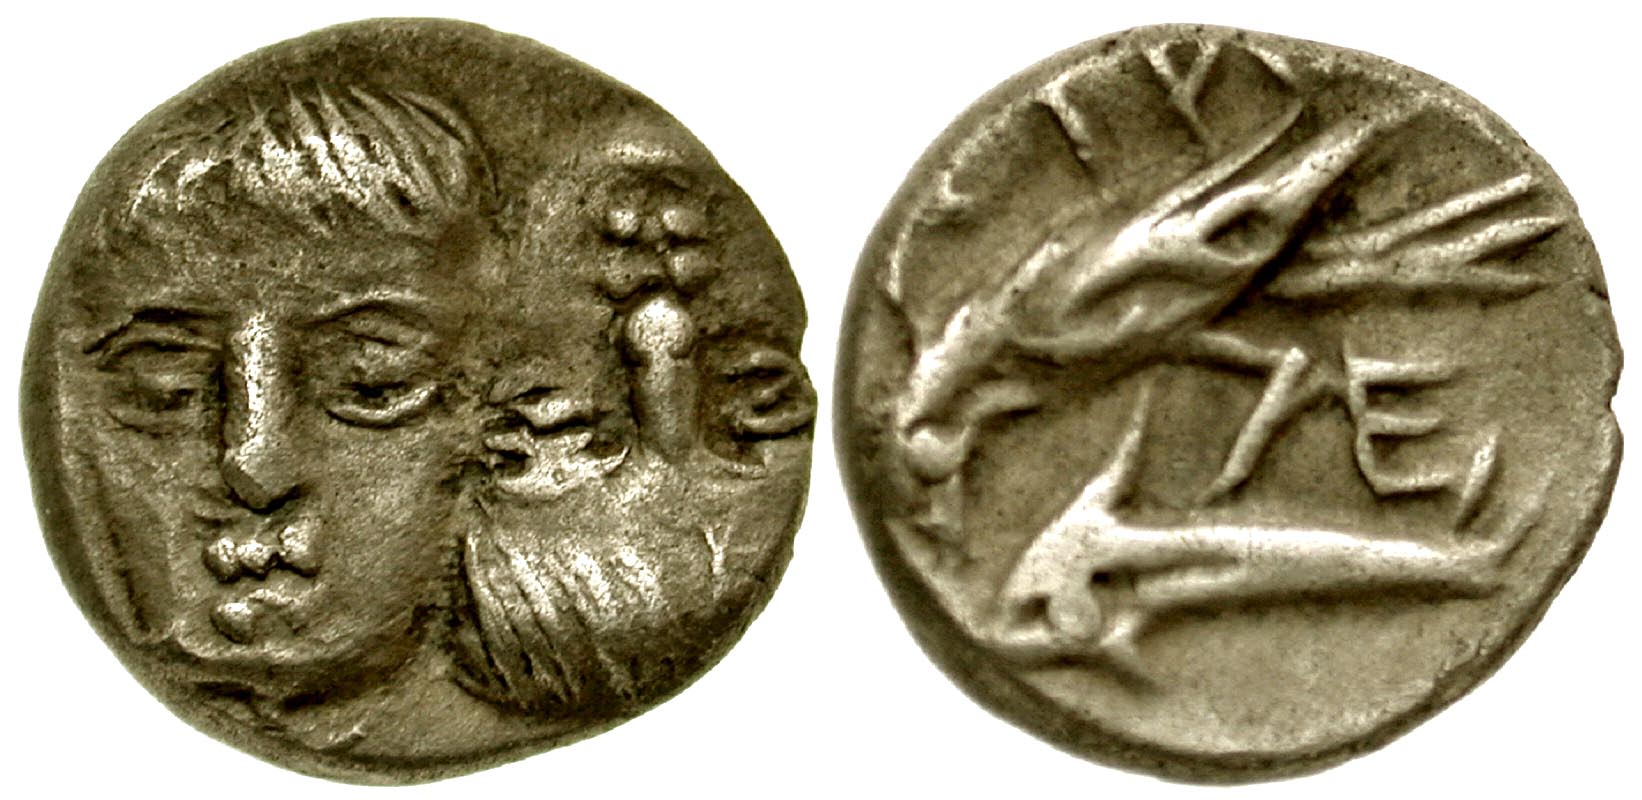 Thrace, Moesia. Istros. Civic issue. Ca. 400-350 B.C. AR hemidrachm. Contemporary copy. From the D. Thomas Collection. 